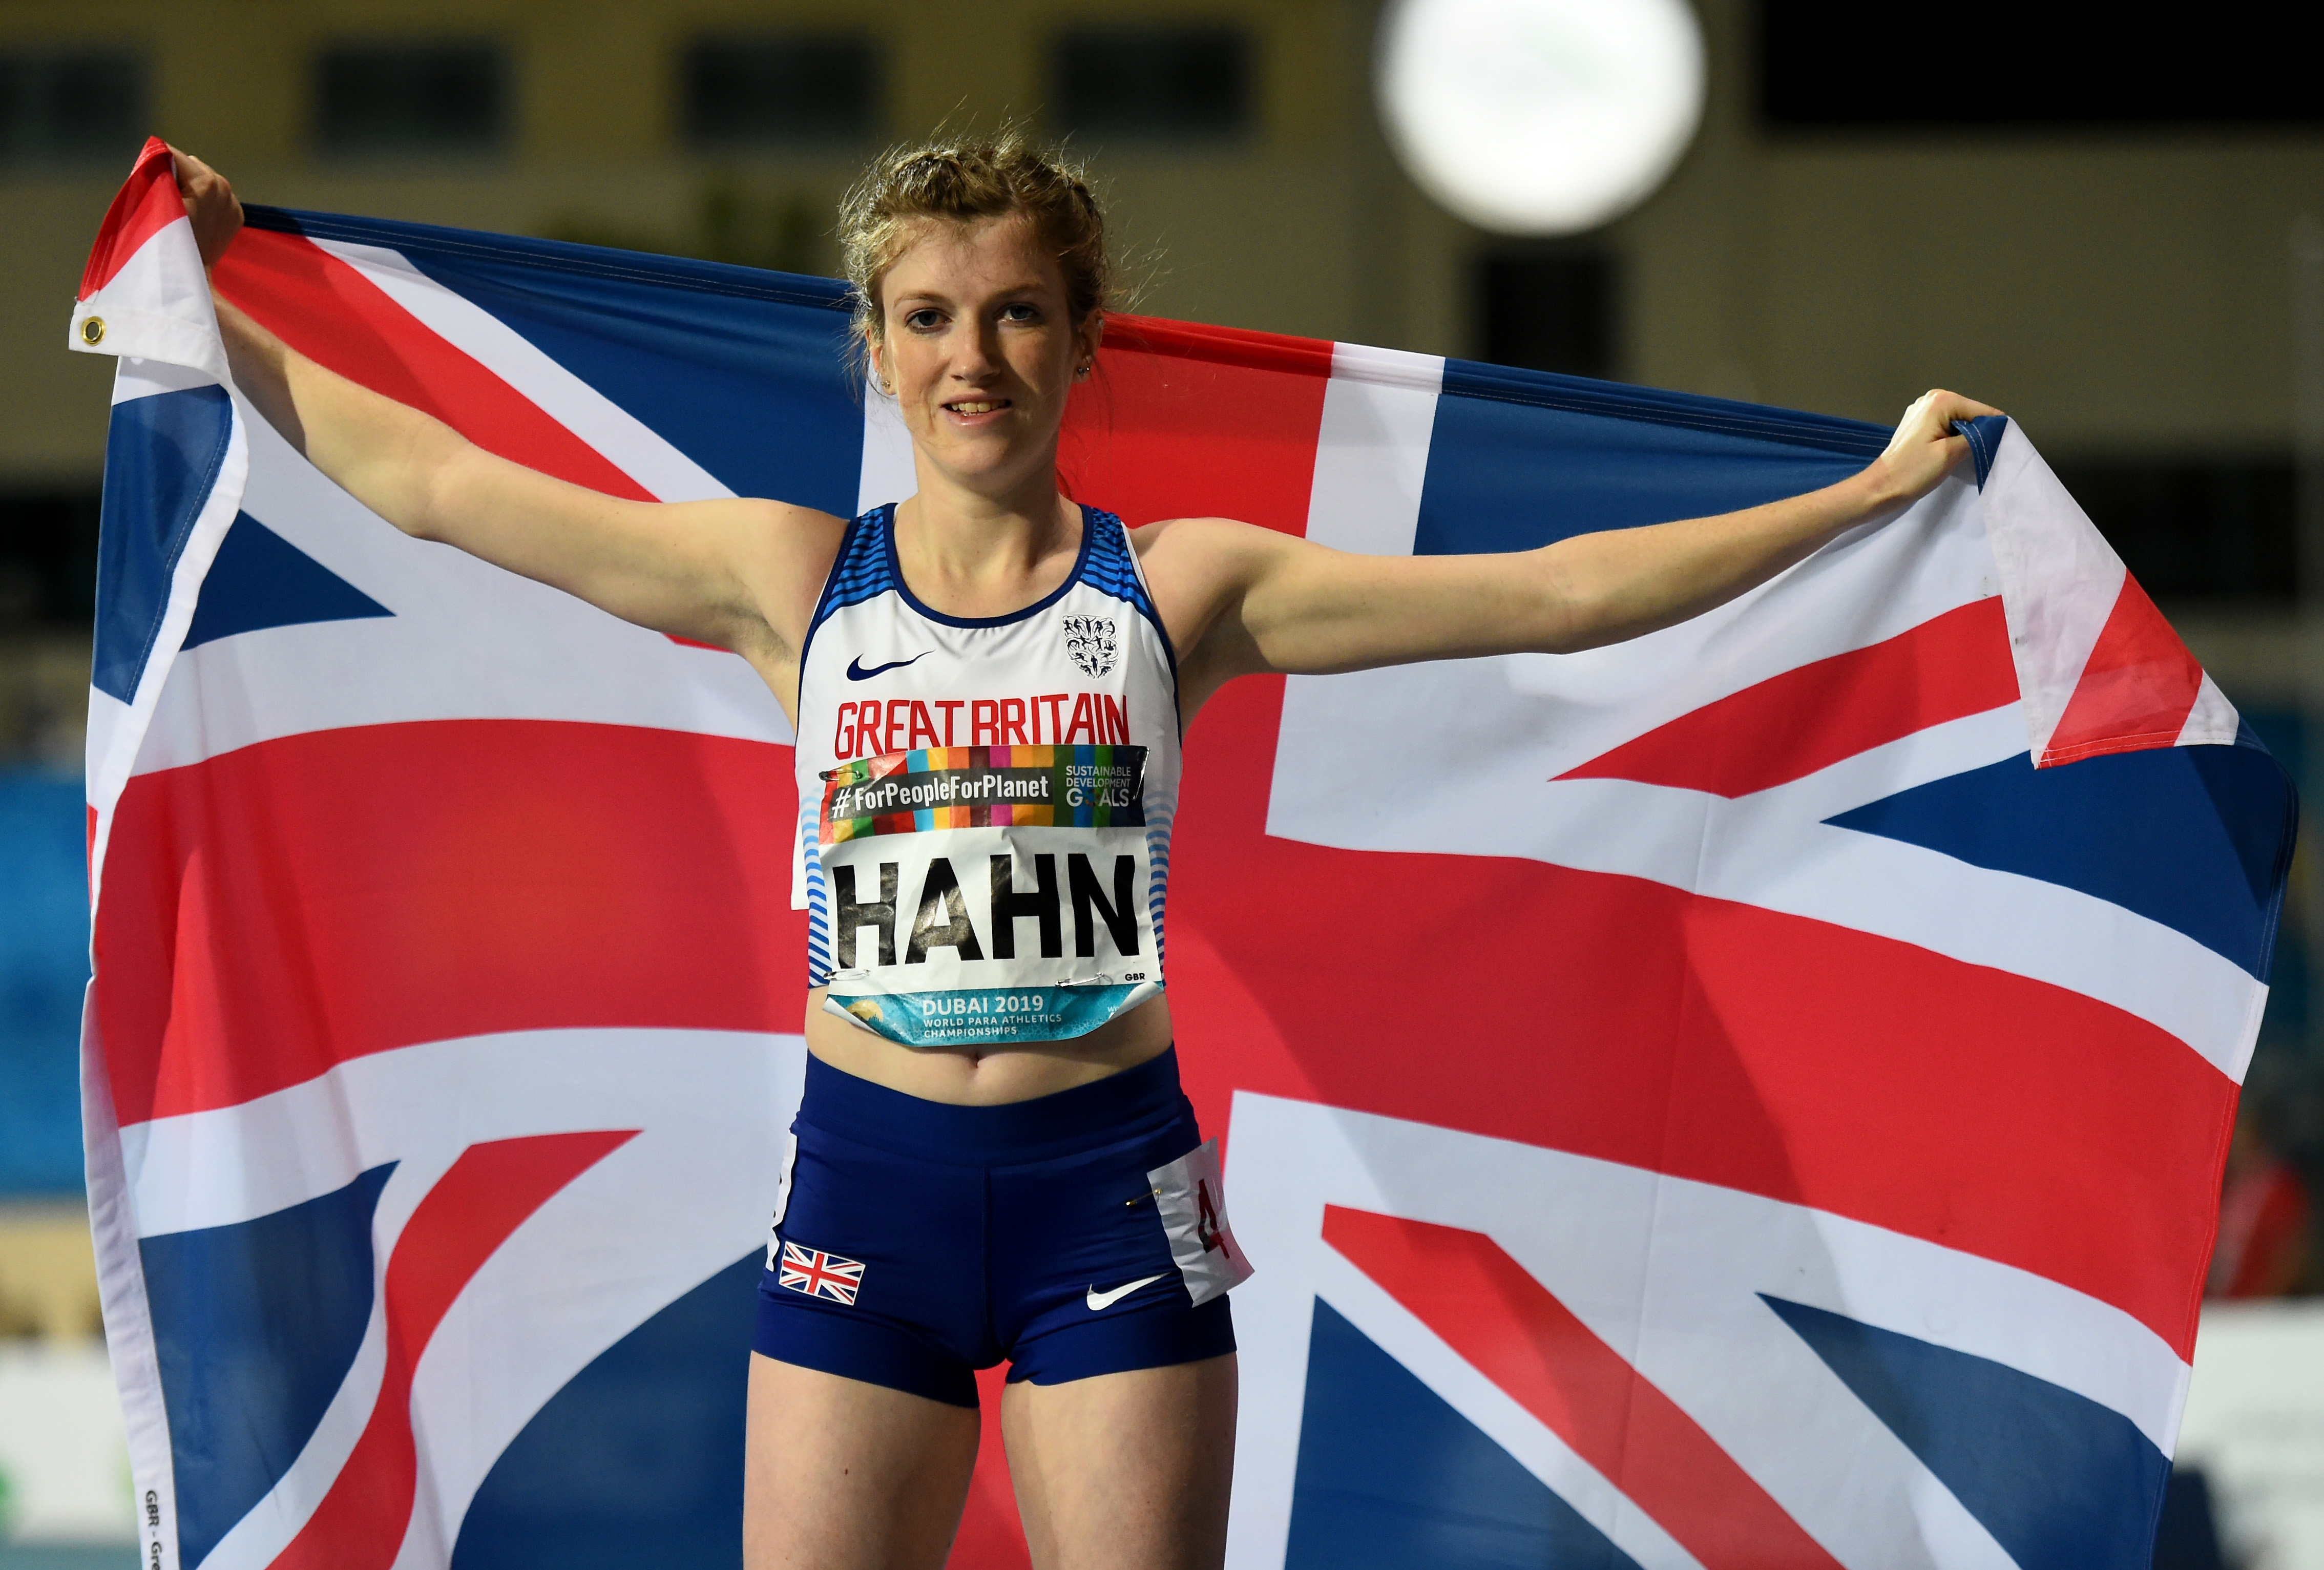 SUPPORT SYSTEM IS KEY FOR HAHN AS SHE ADAPTS TO TRAINING IN LOCKDOWN